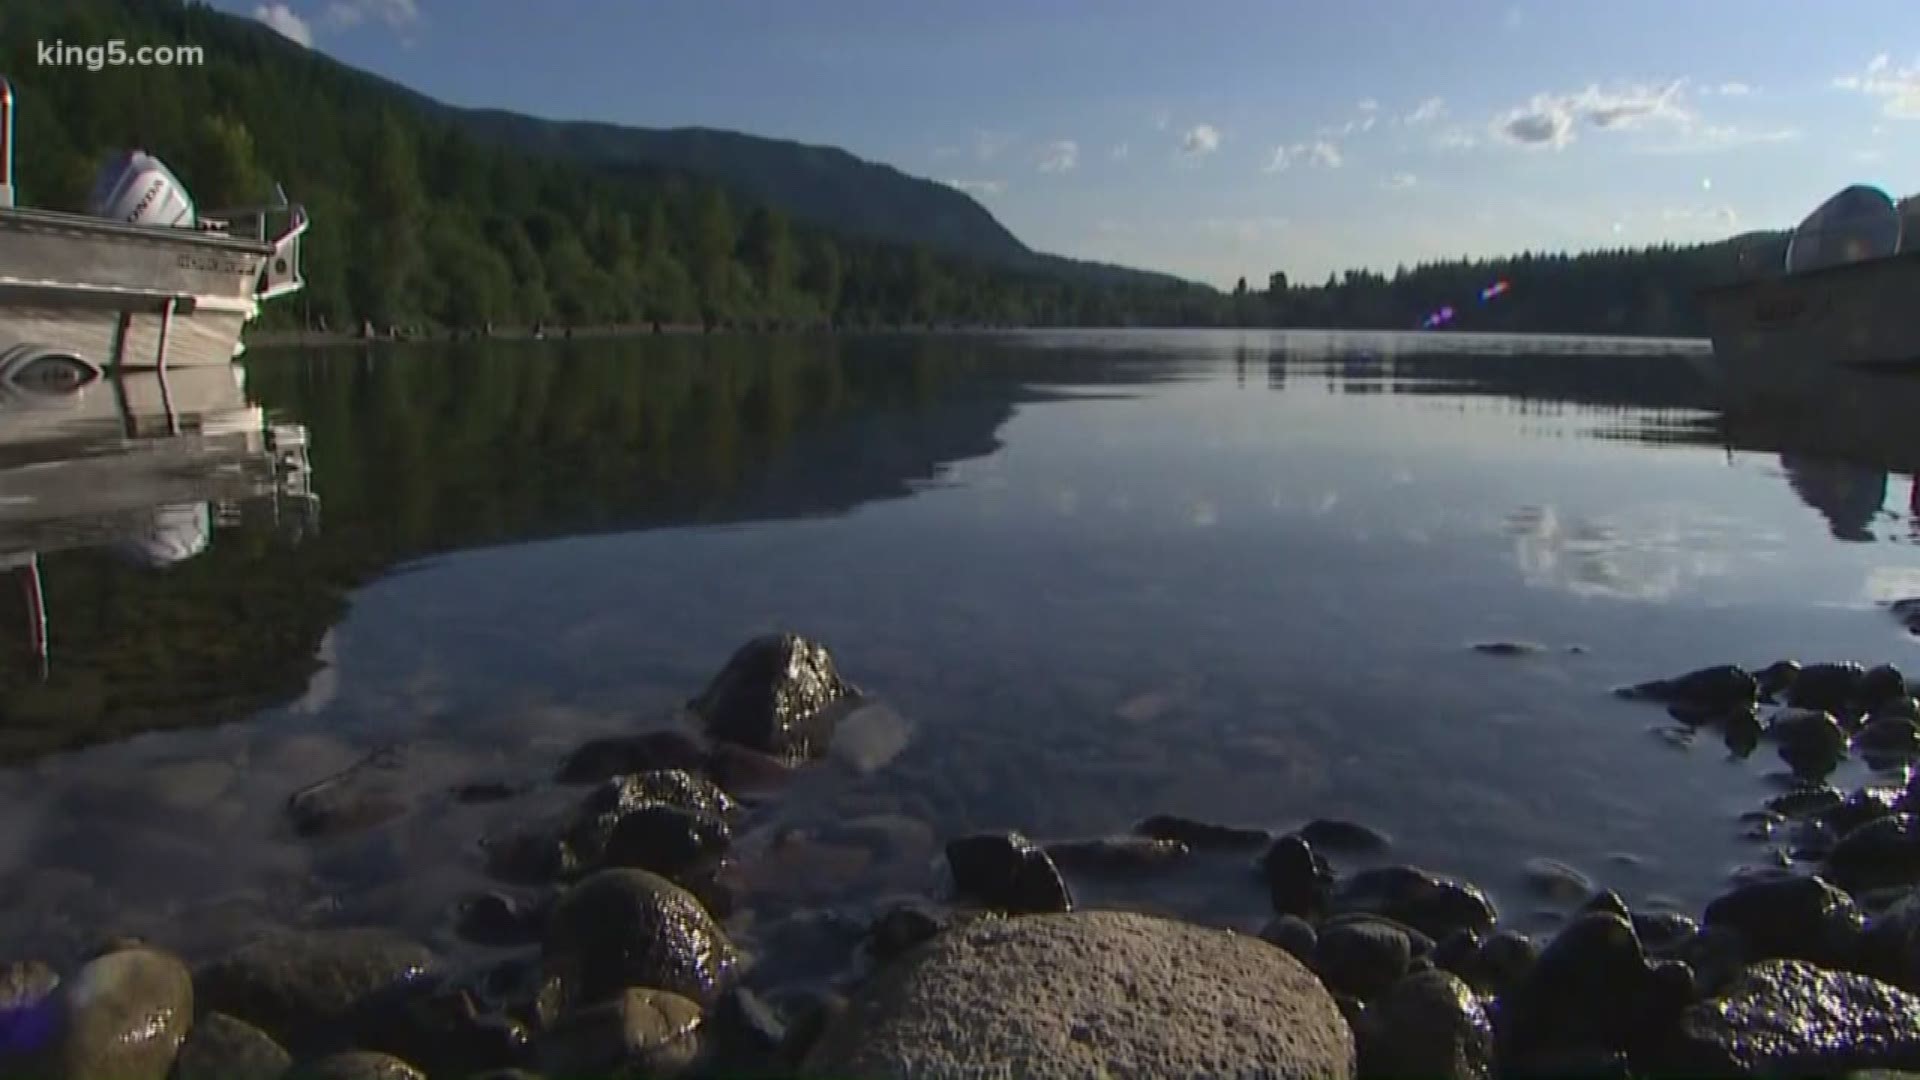 Eastside Fire and Rescue along with KCSO Marine Rescue Dive Unit responded to Rattlesnake Lake after two kayakers called 911, concerned about a swimmer. KING 5's Natalie Swaby reports.